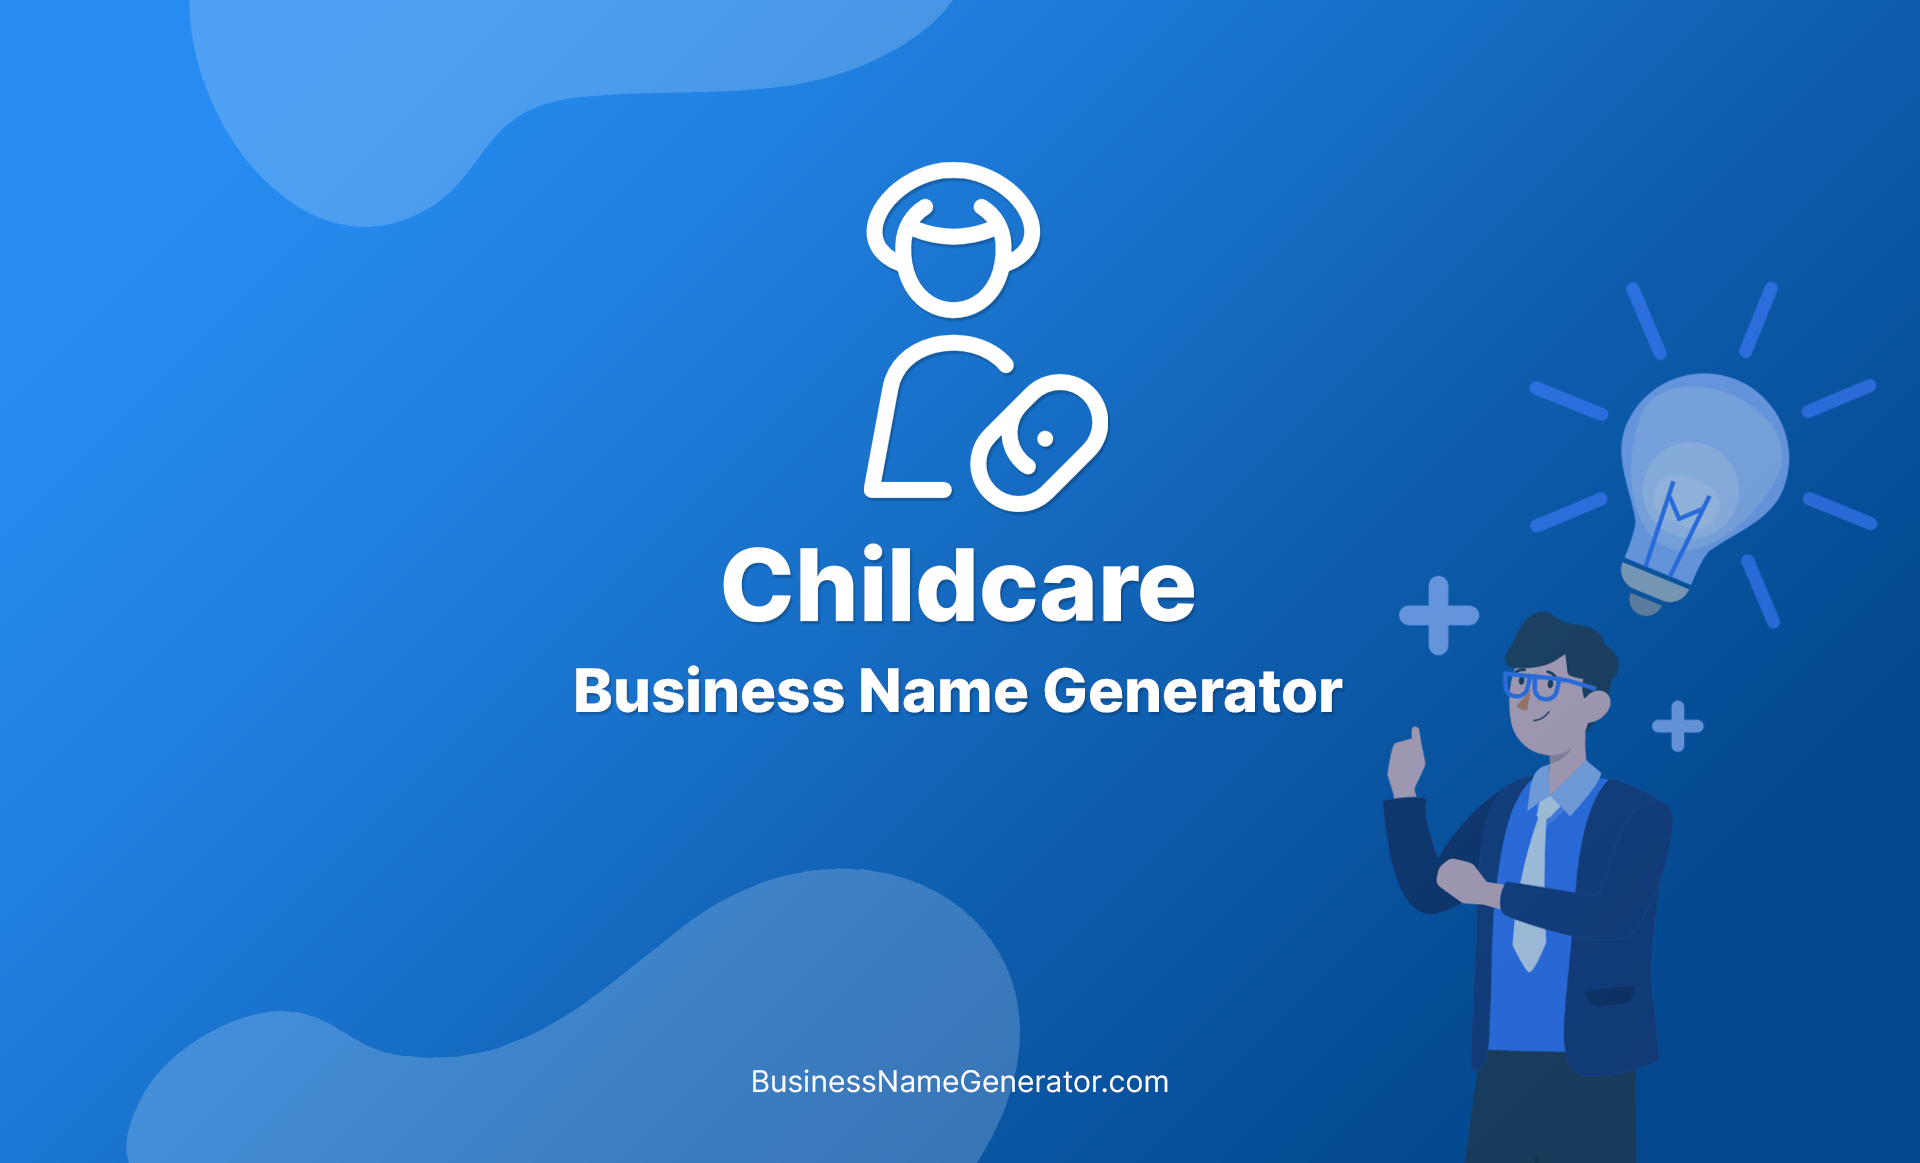 Childcare Business Name Generator